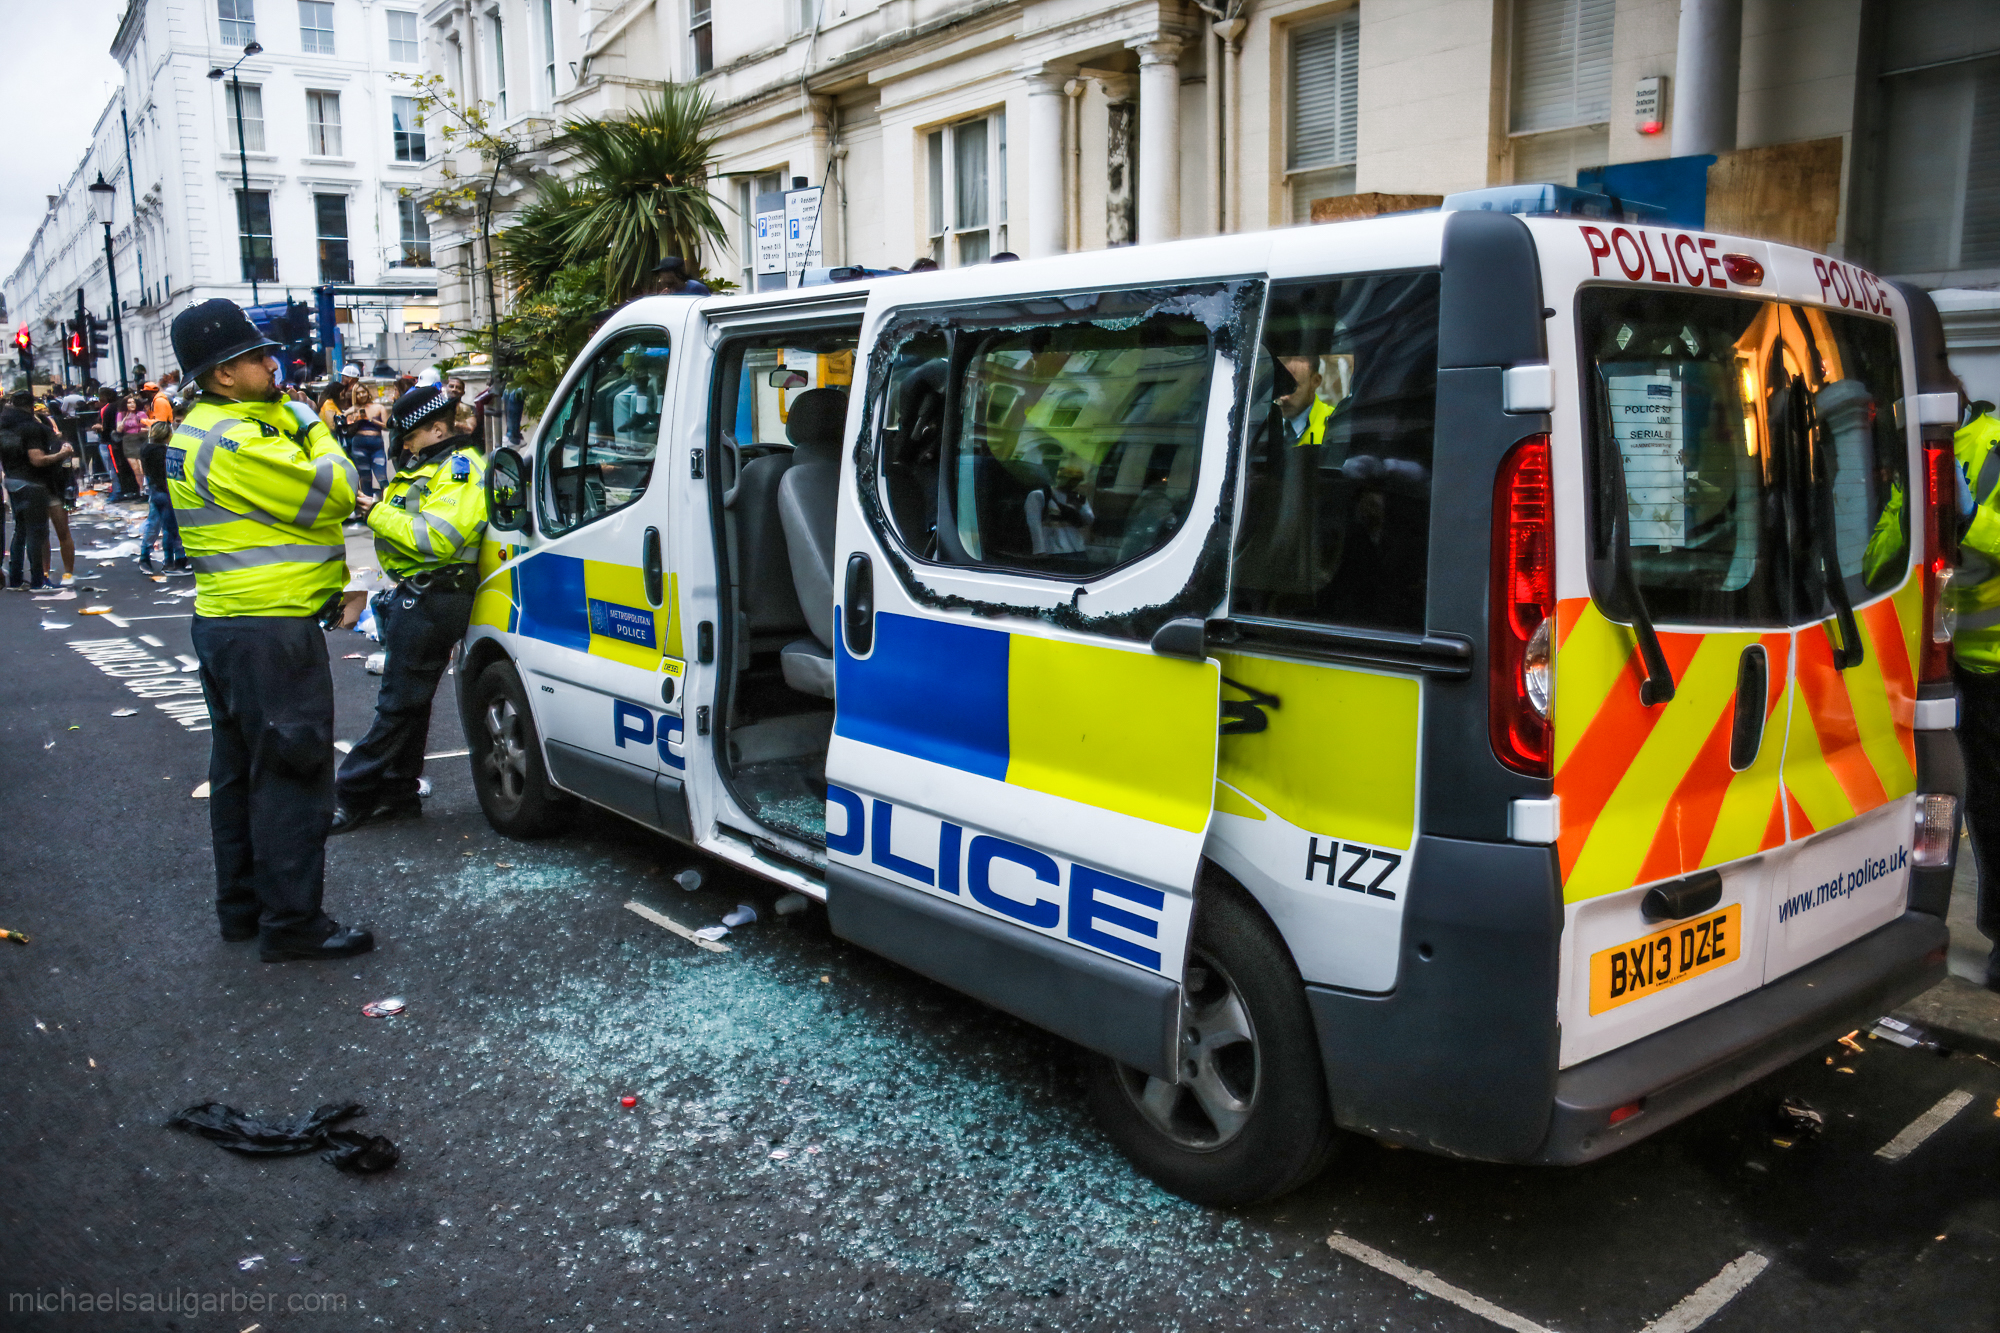 The 2018 event saw 373 arrests over two days out of over 1-million attendees, Notting Hill Carnival, 2018